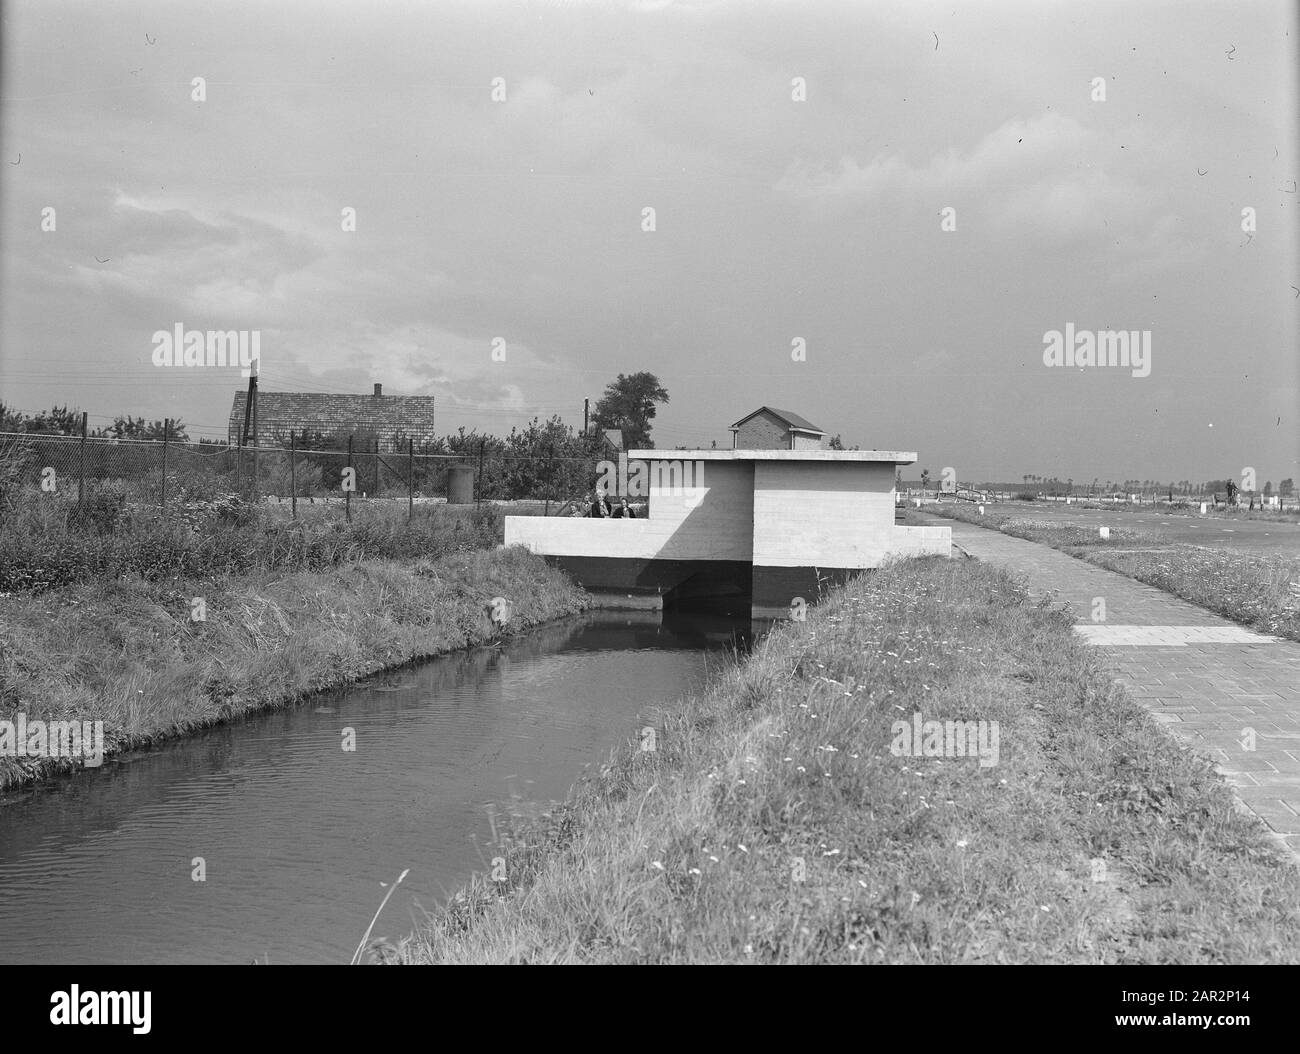 poldering and bemaling, exhaust divers, pedestrian tunnels Date: undated Location: Hedel Keywords: poldering and bemaling, exhaust divers, pedestrian tunnels Stock Photo